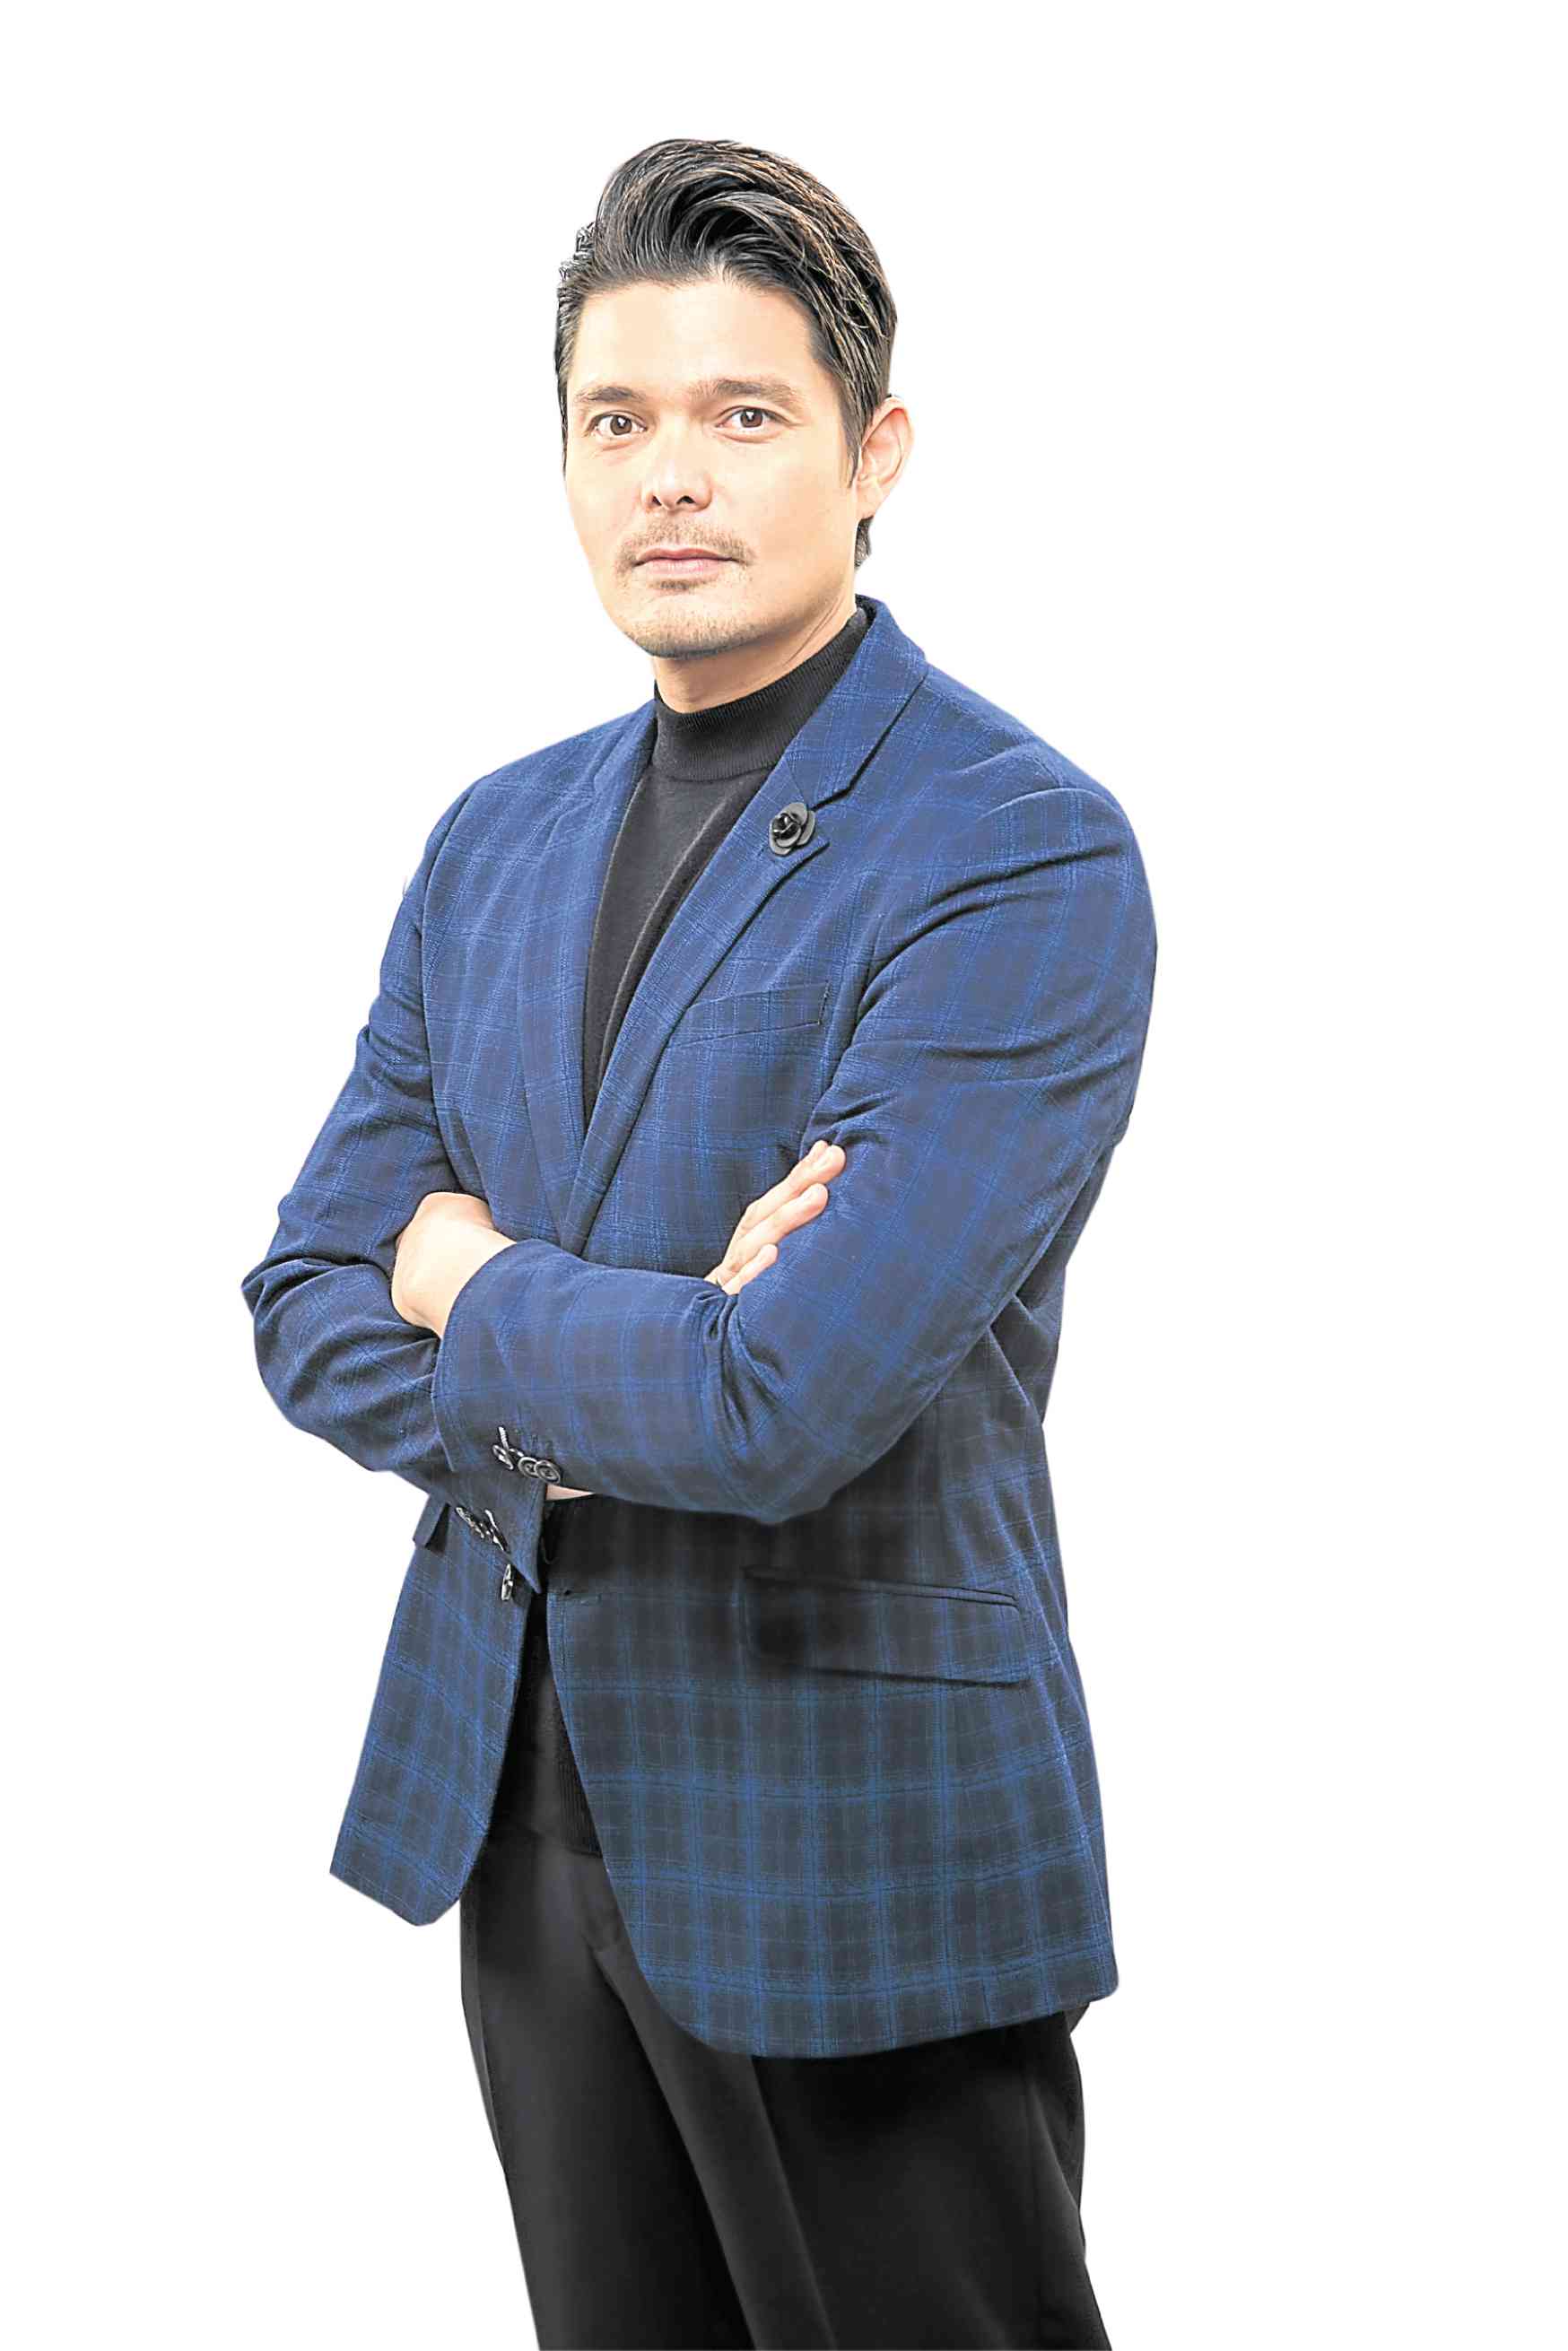 Dingdong Dantes to compete in 42-km race | Inquirer Entertainment